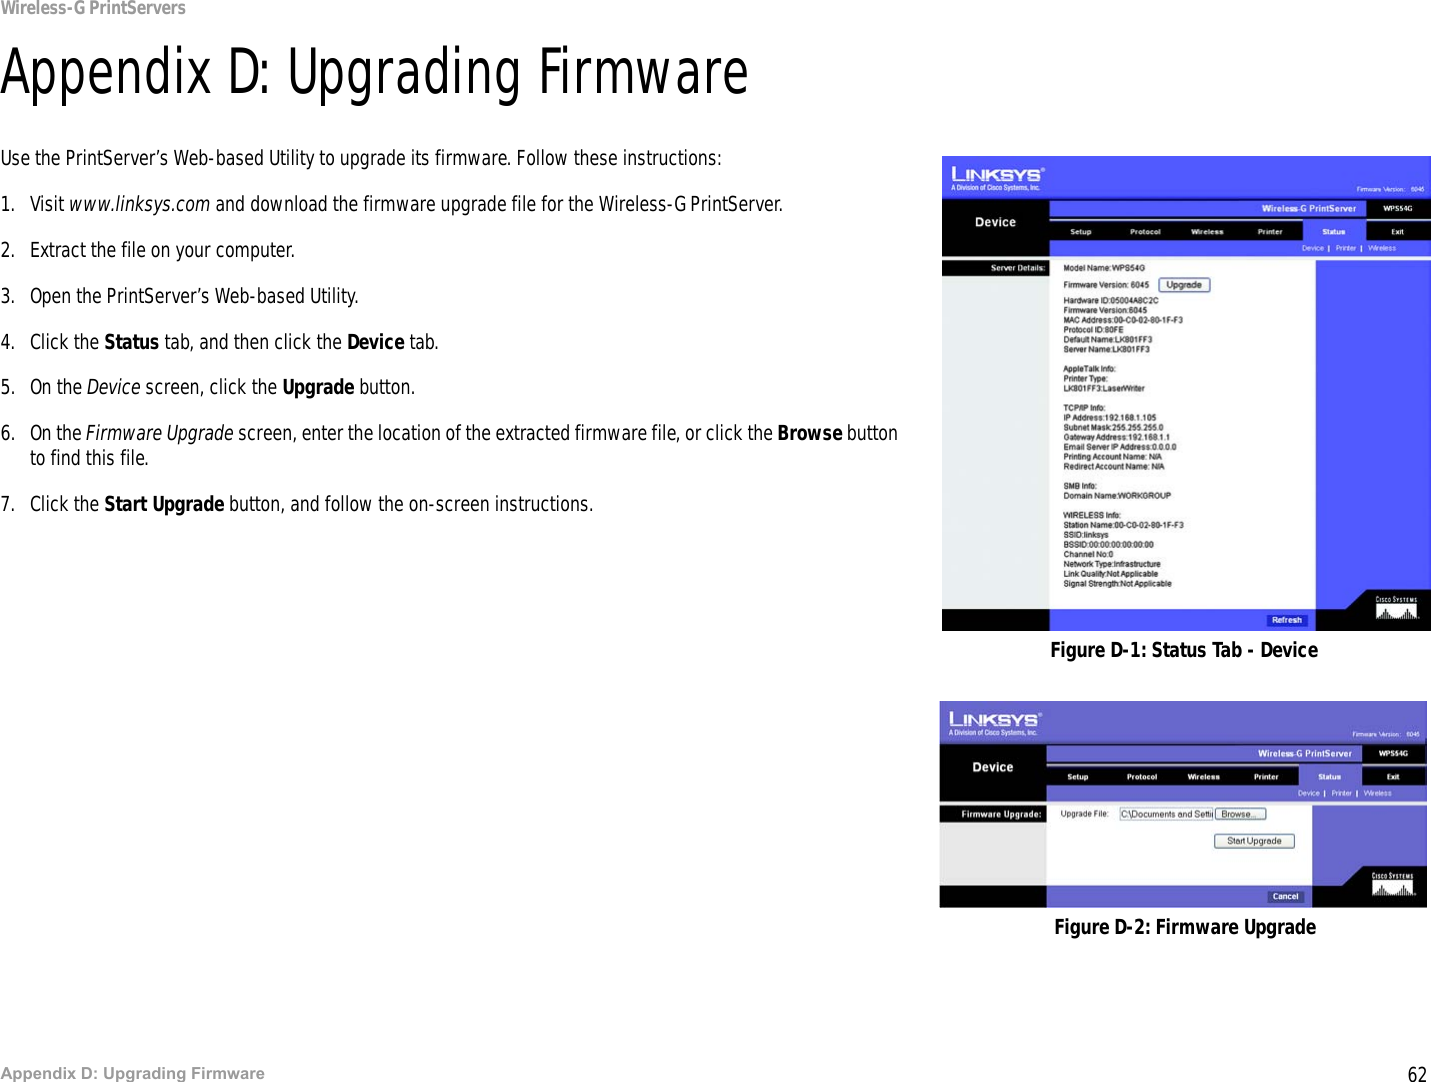 62Appendix D: Upgrading FirmwareWireless-G PrintServersAppendix D: Upgrading FirmwareUse the PrintServer’s Web-based Utility to upgrade its firmware. Follow these instructions:1. Visit www.linksys.com and download the firmware upgrade file for the Wireless-G PrintServer. 2. Extract the file on your computer. 3. Open the PrintServer’s Web-based Utility.4. Click the Status tab, and then click the Device tab.5. On the Device screen, click the Upgrade button.6. On the Firmware Upgrade screen, enter the location of the extracted firmware file, or click the Browse button to find this file.7. Click the Start Upgrade button, and follow the on-screen instructions.Figure D-1: Status Tab - DeviceFigure D-2: Firmware Upgrade